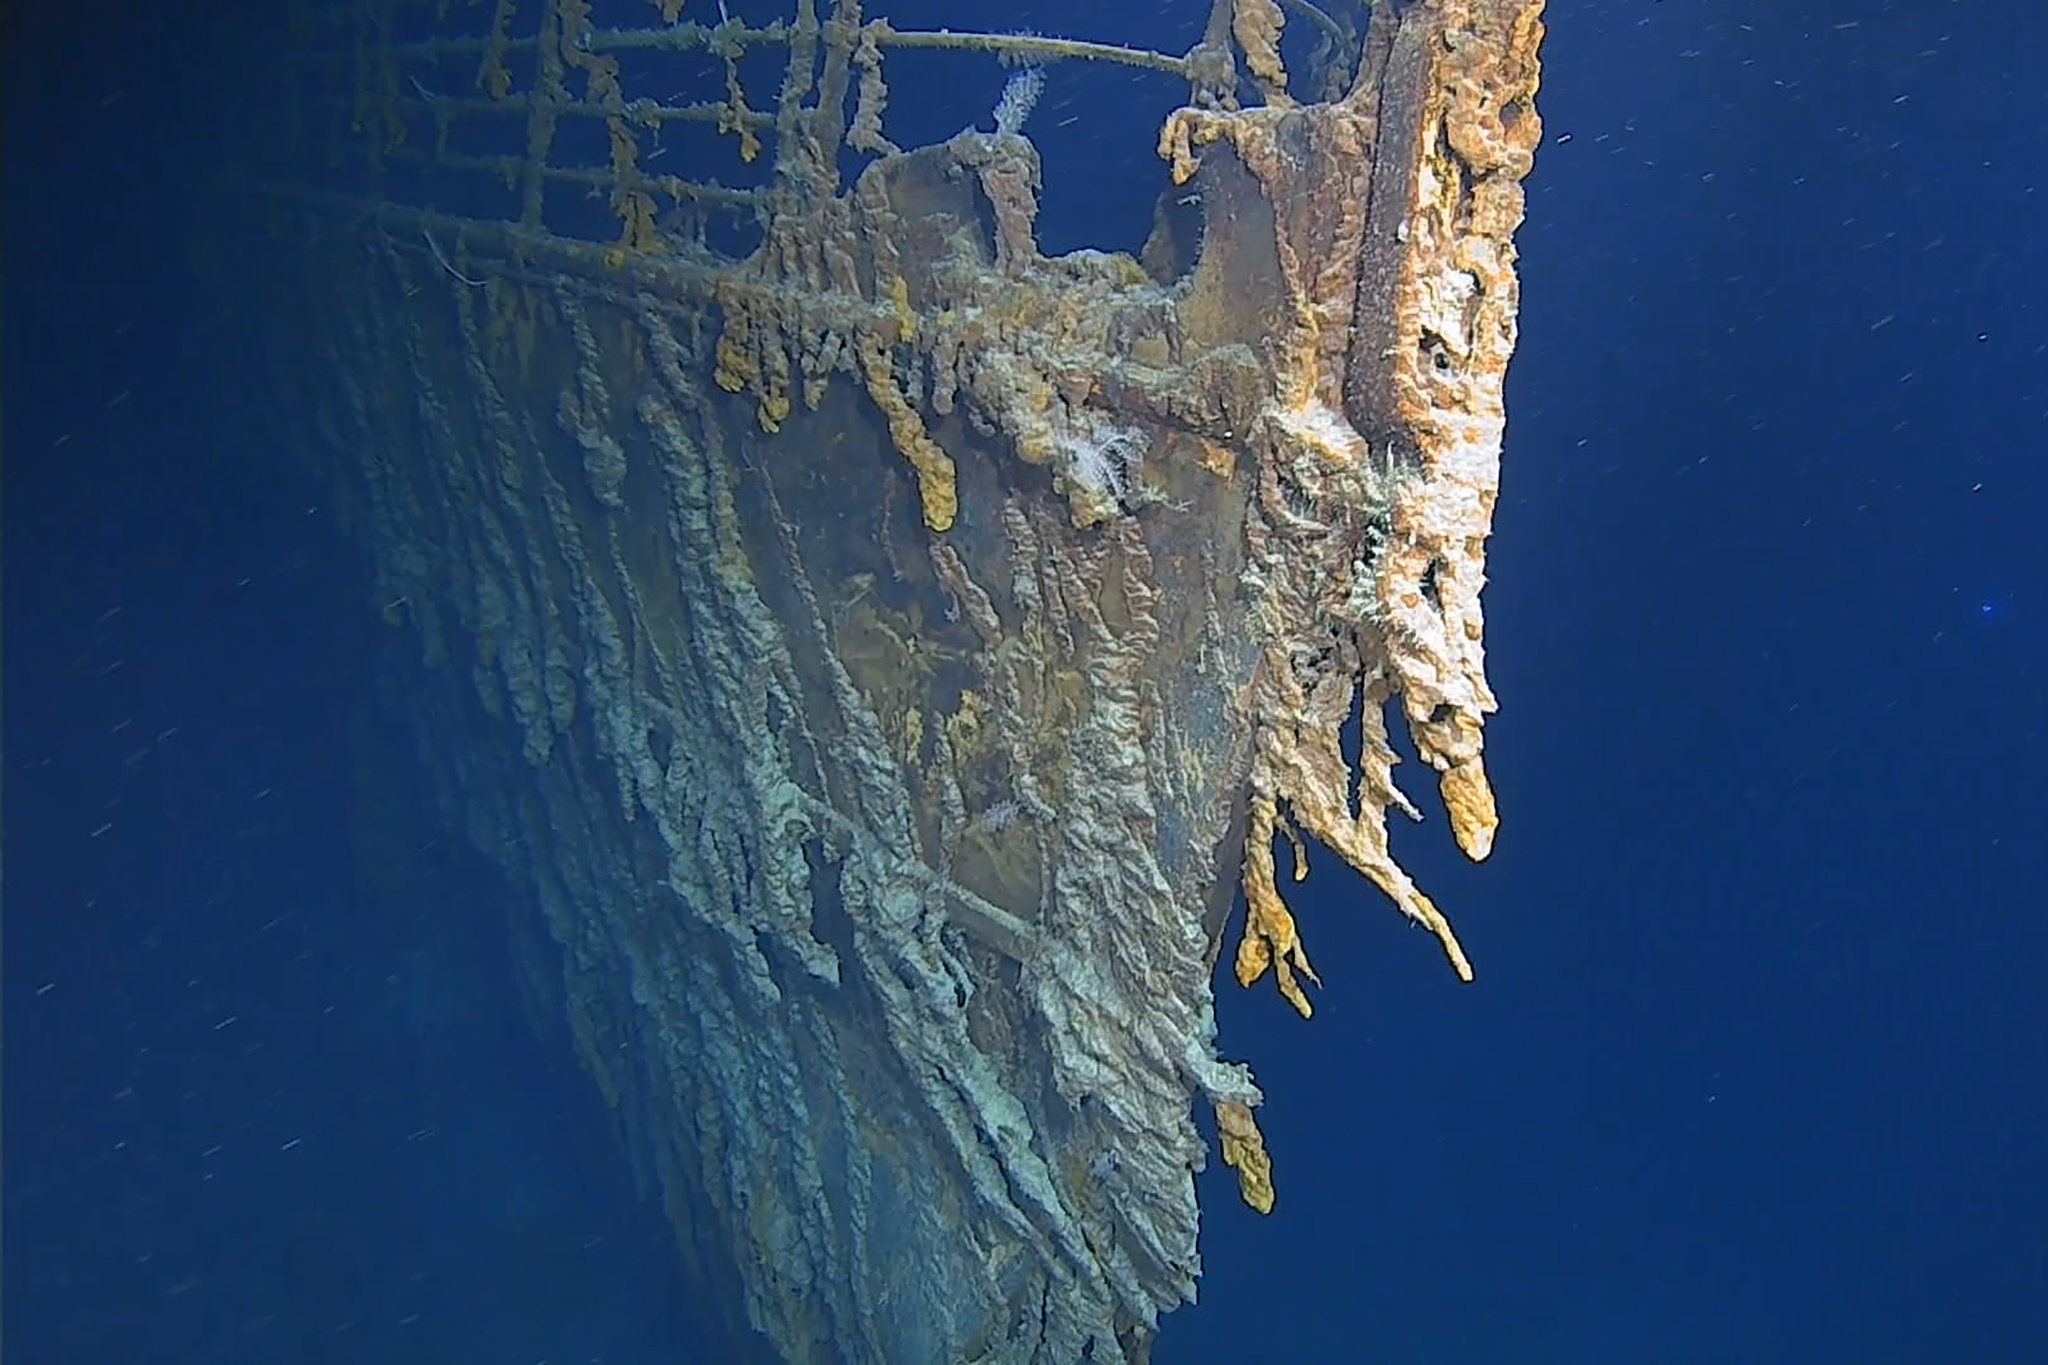 Where the Titanic Shipwreck Rests, New Photo Reveal Extensive